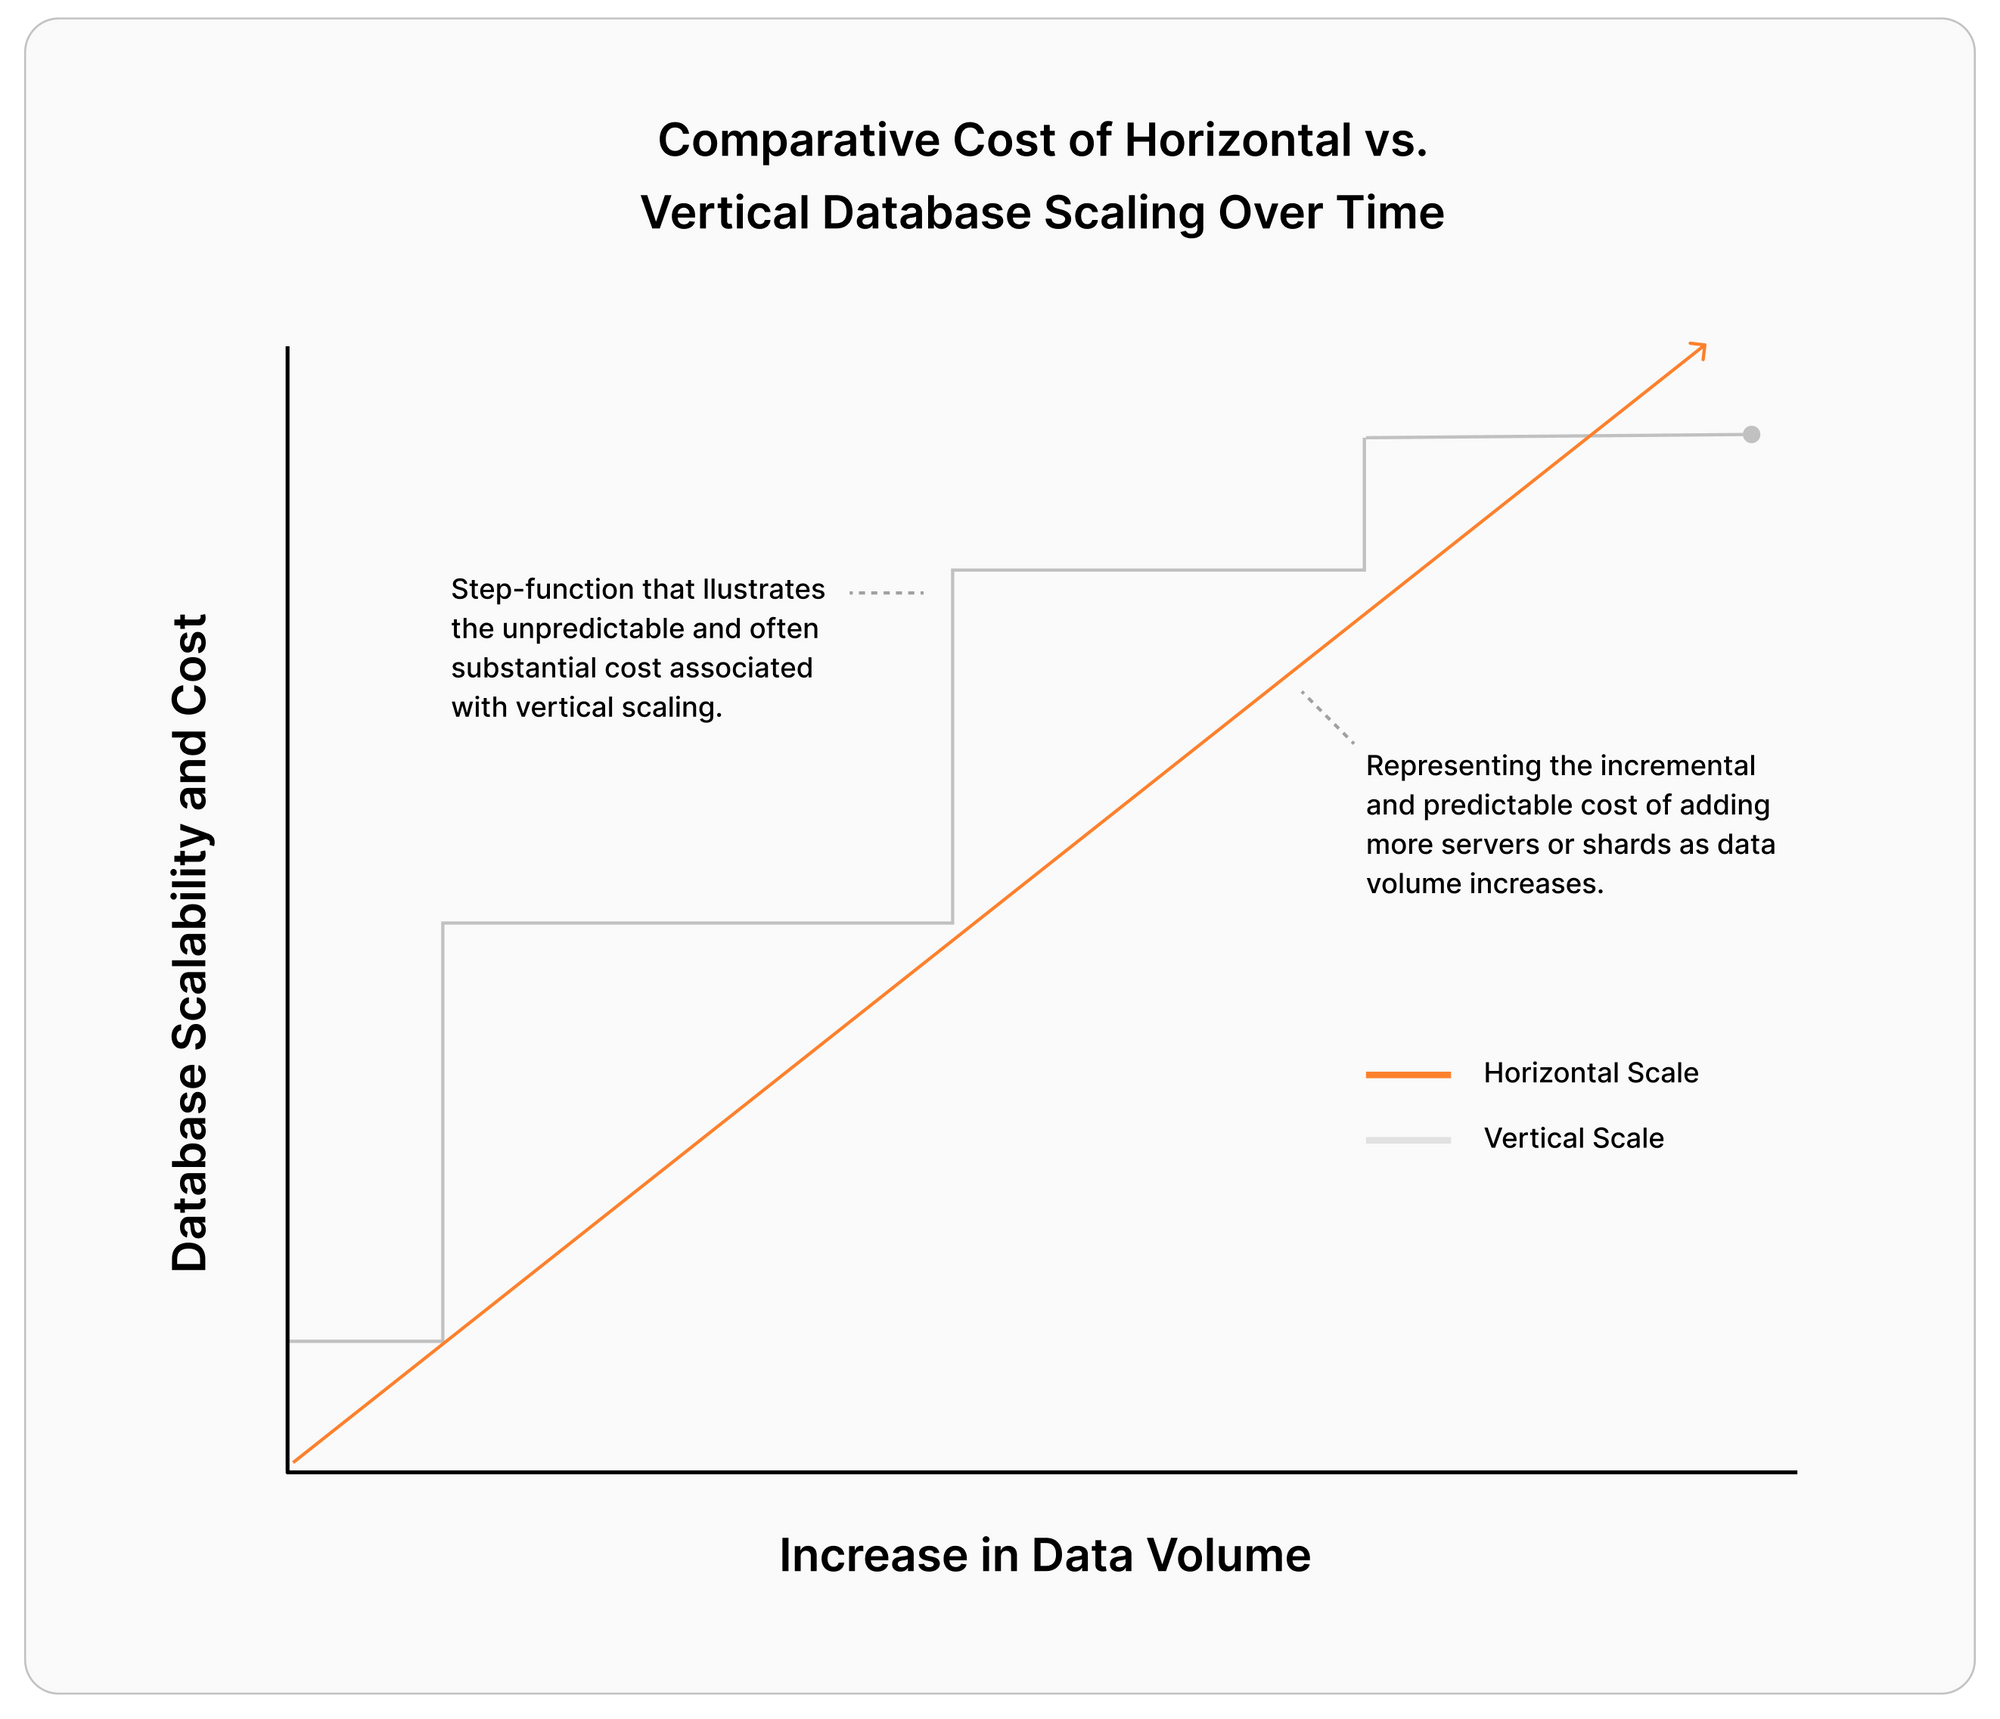 A graph of comparative cost of horizontal versus vertical database scaling over time. A step-function that illustrates the unpredictable and often substantial cost associated with vertical scaling. The x-axis is an increase in data volume. The y-axis is database scalability and cost. A linear increasing line that shows the incremental and predictable cost of adding more servers or shards as data volume increases.